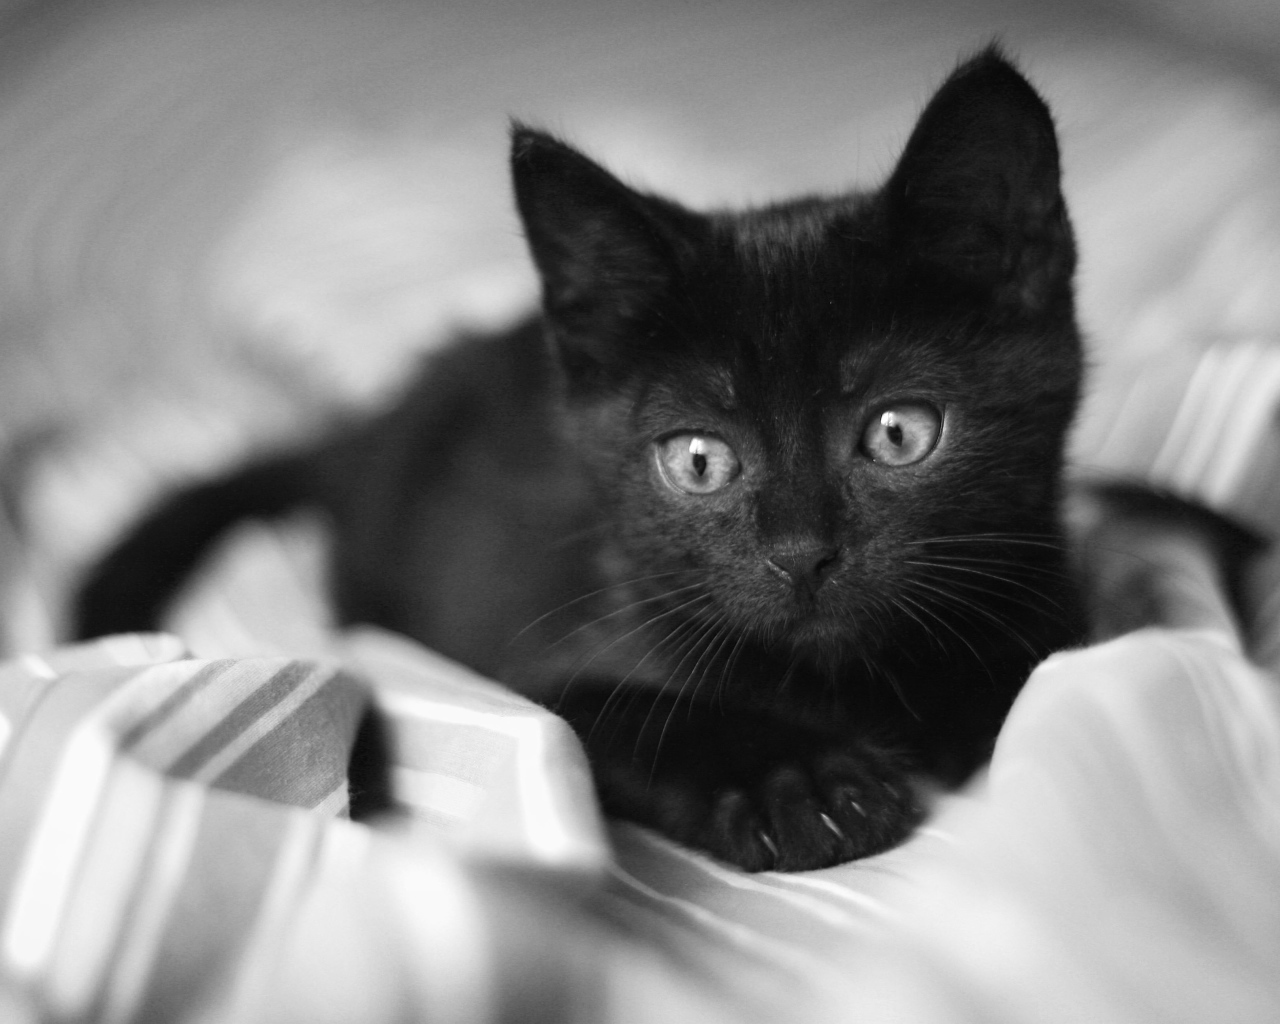  Beautiful little black cat lying on the bed